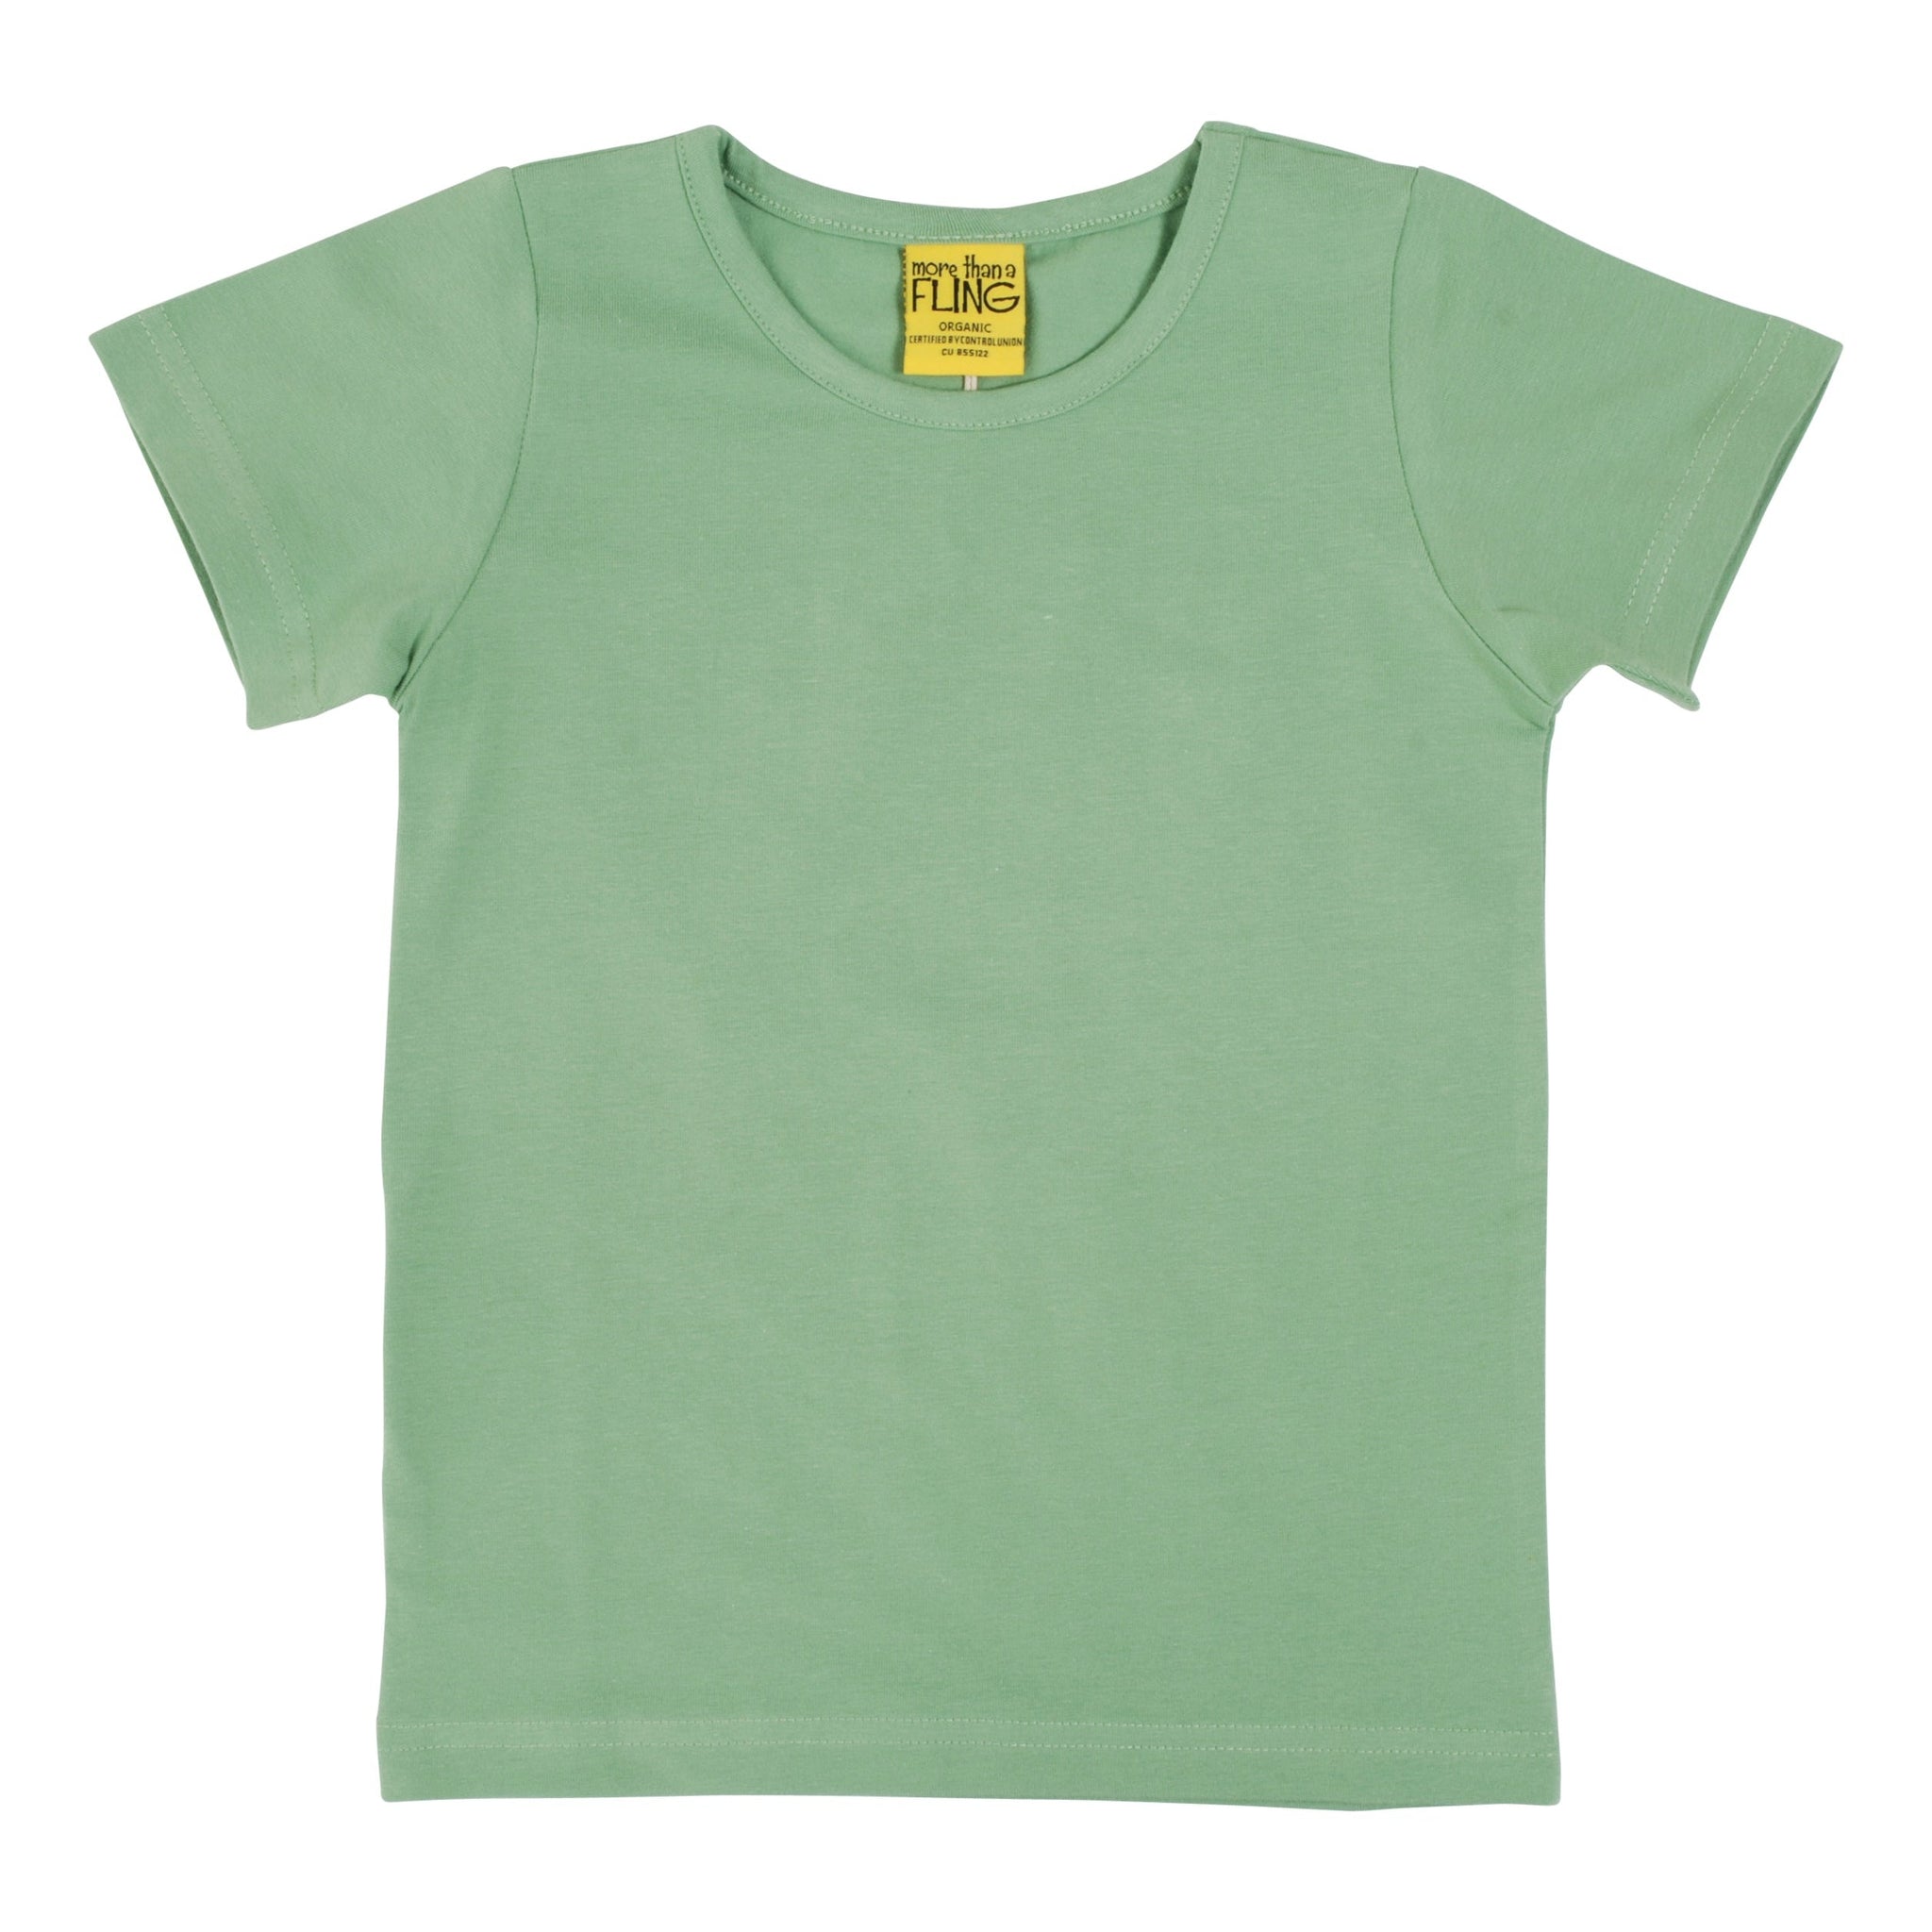 More Than A FLING - Mineral Green Short Sleeved Top (2-4 Years)